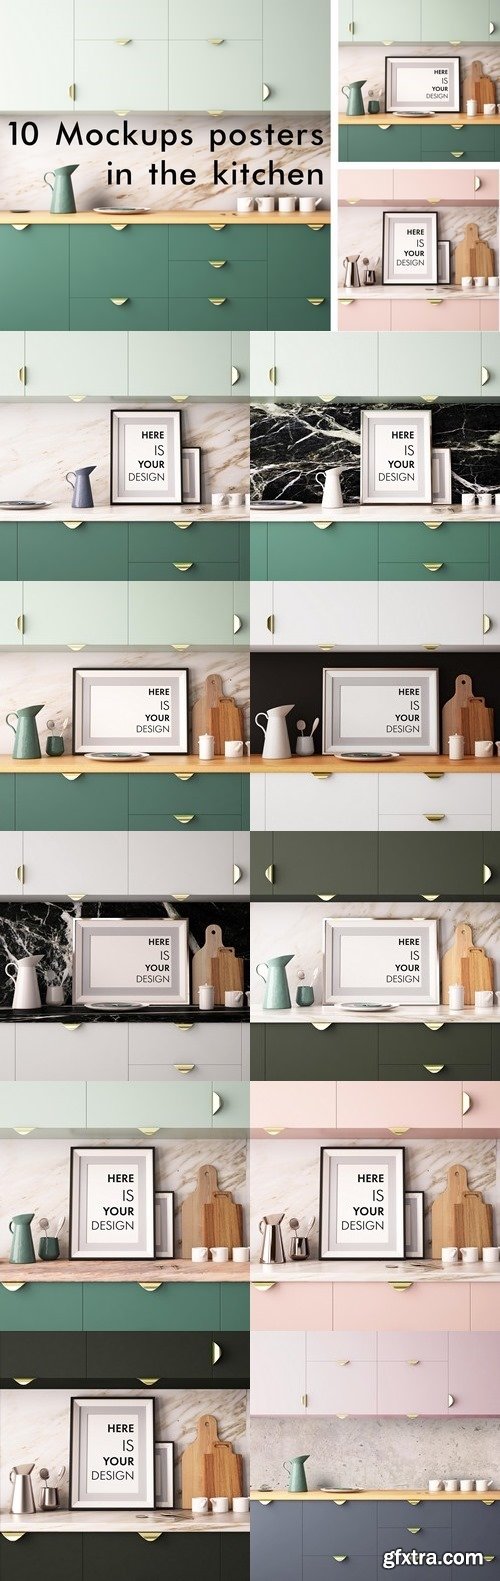 CM - 10 Mockups posters in the kitchen 1477410